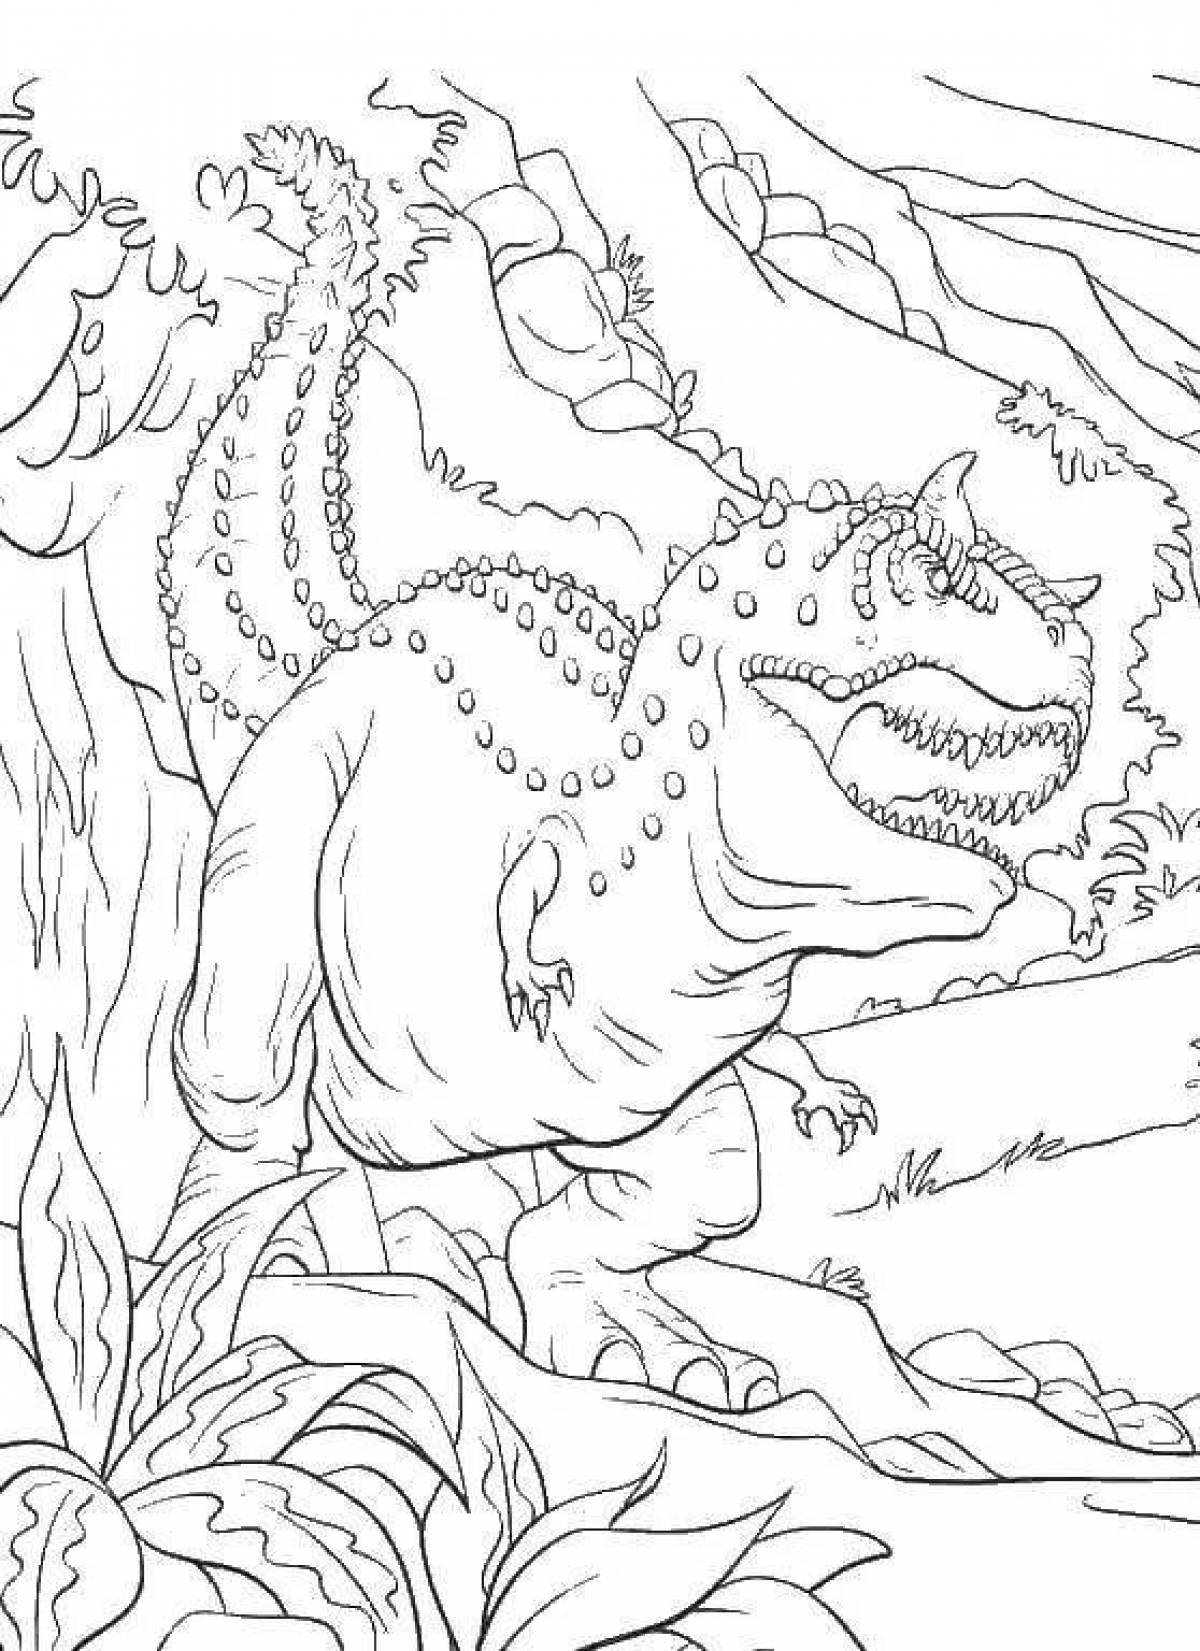 Awesome carnotaurus coloring book